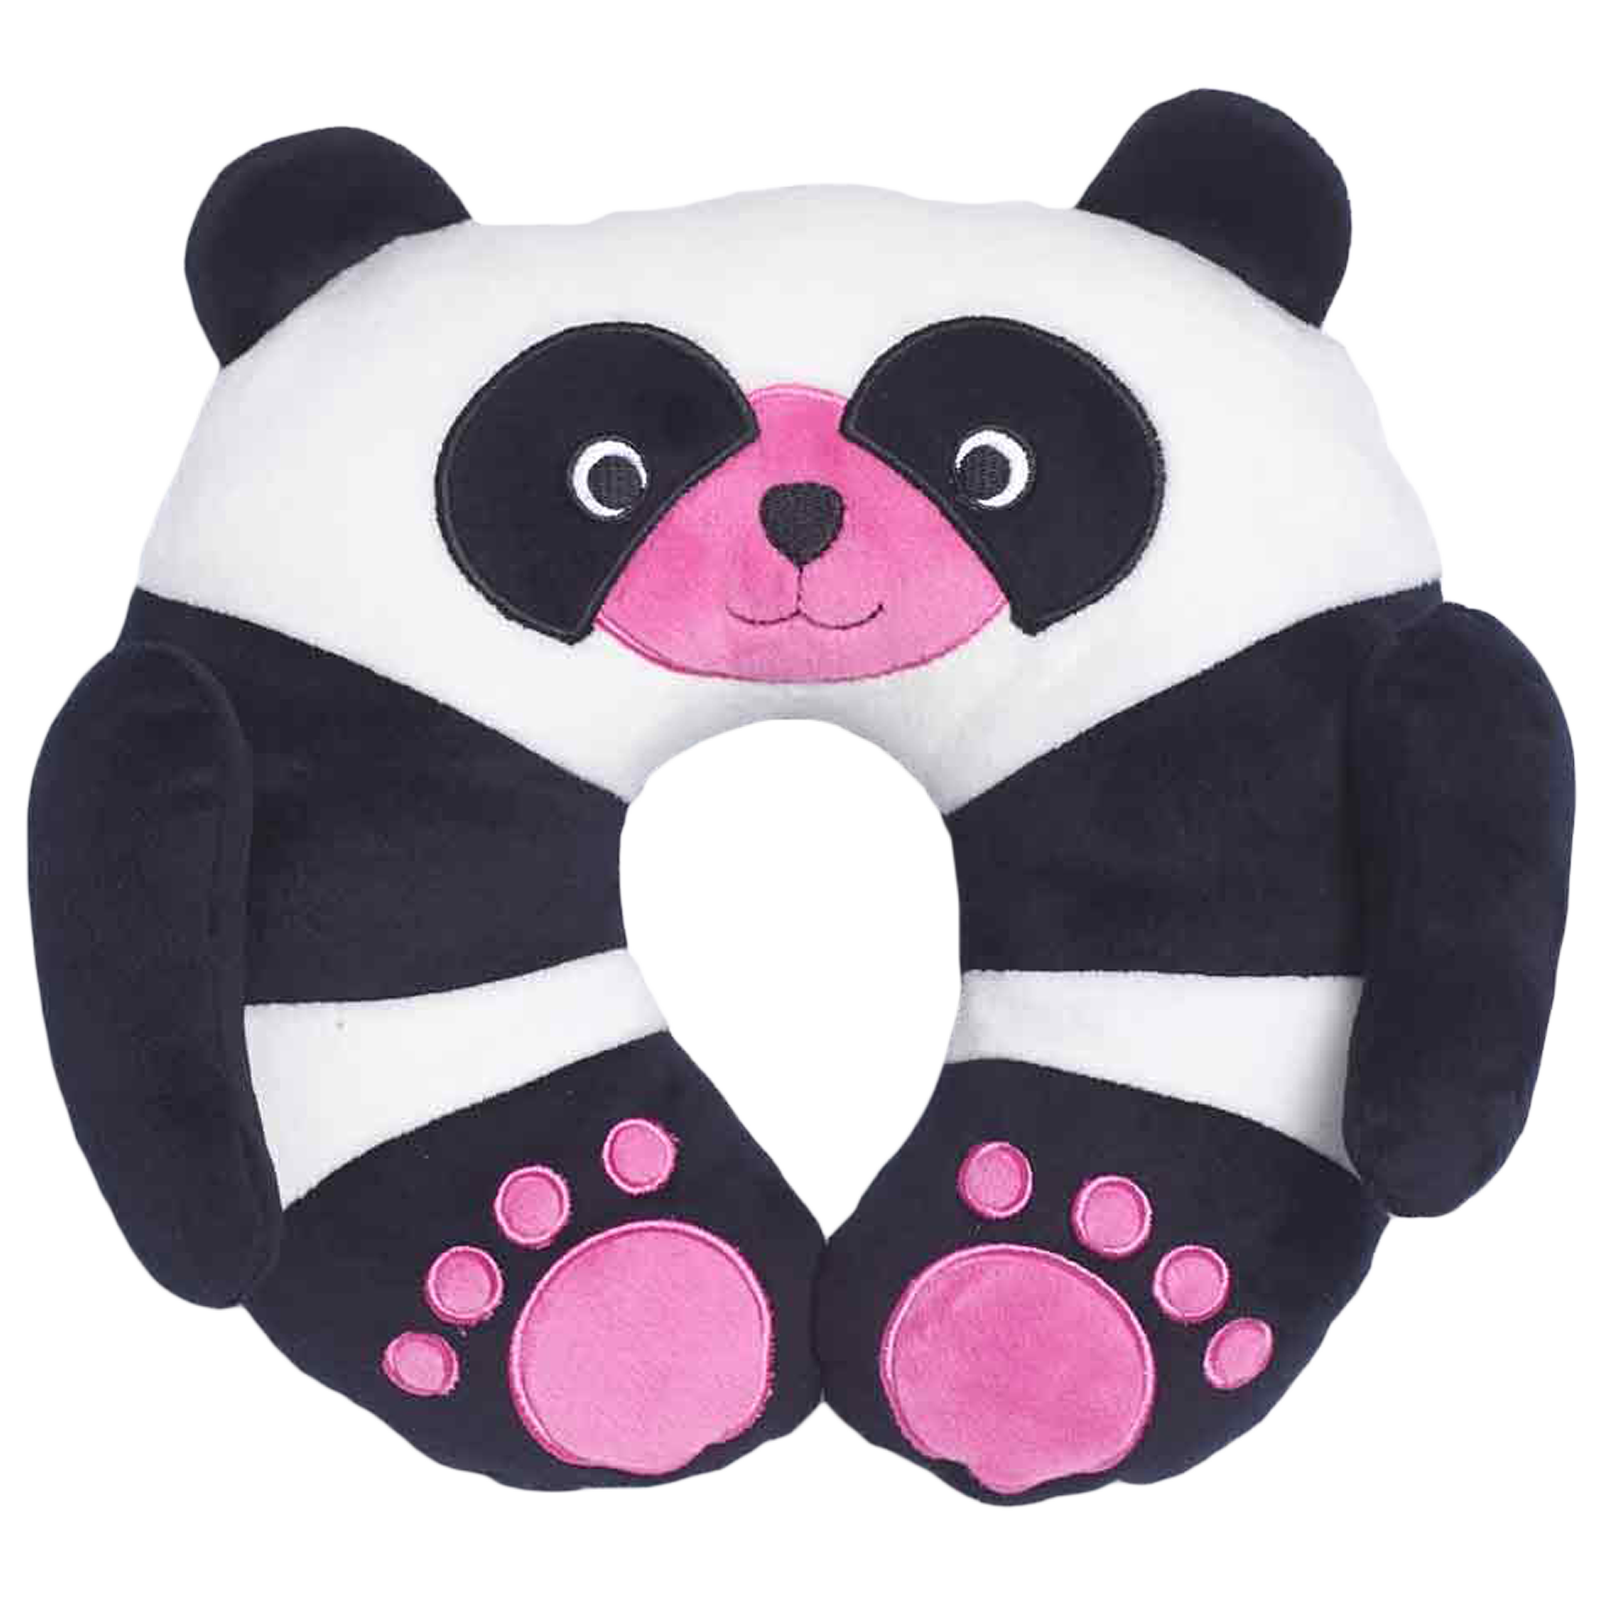 Travel Blue Chi Chi The Panda Polyester Neck Pillow (Soft and Comfortable, Multicolor)